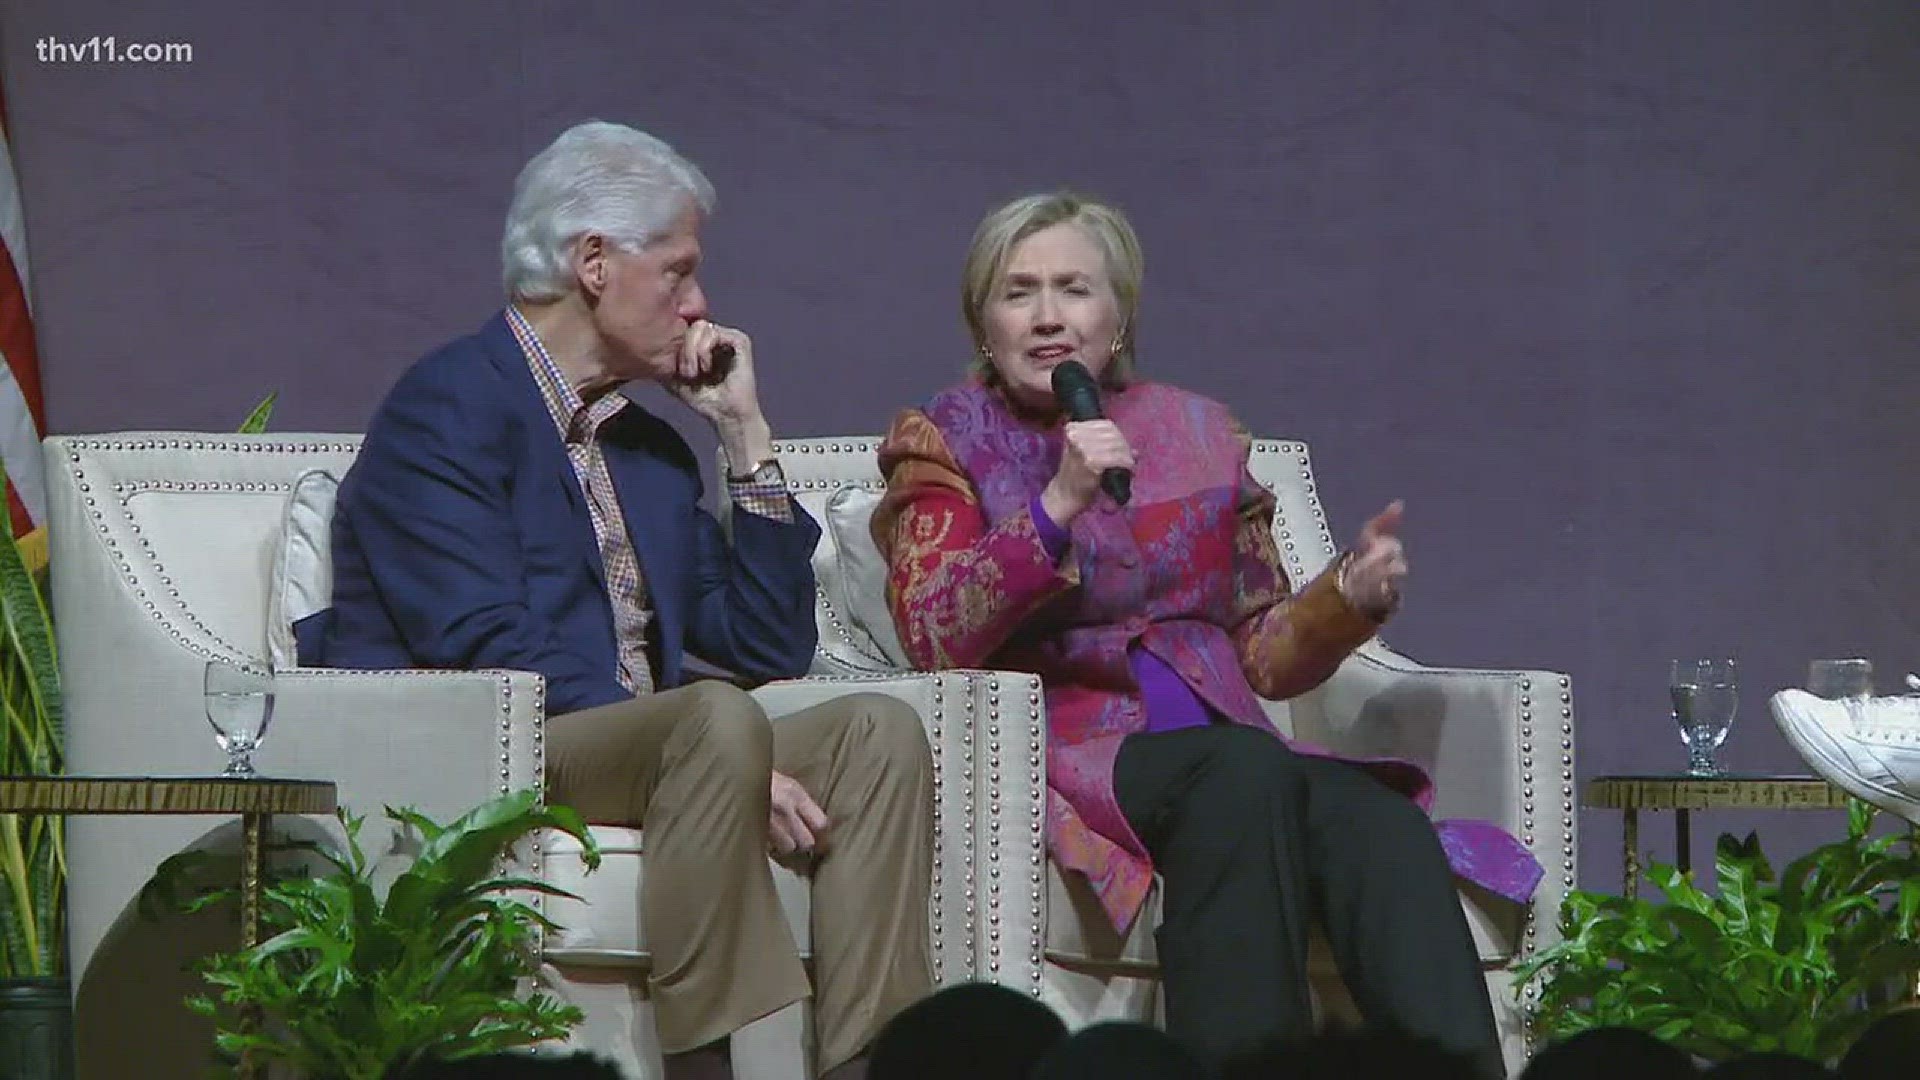 Bill and Hillary Clinton had a conversation onstage today in Arkansas.